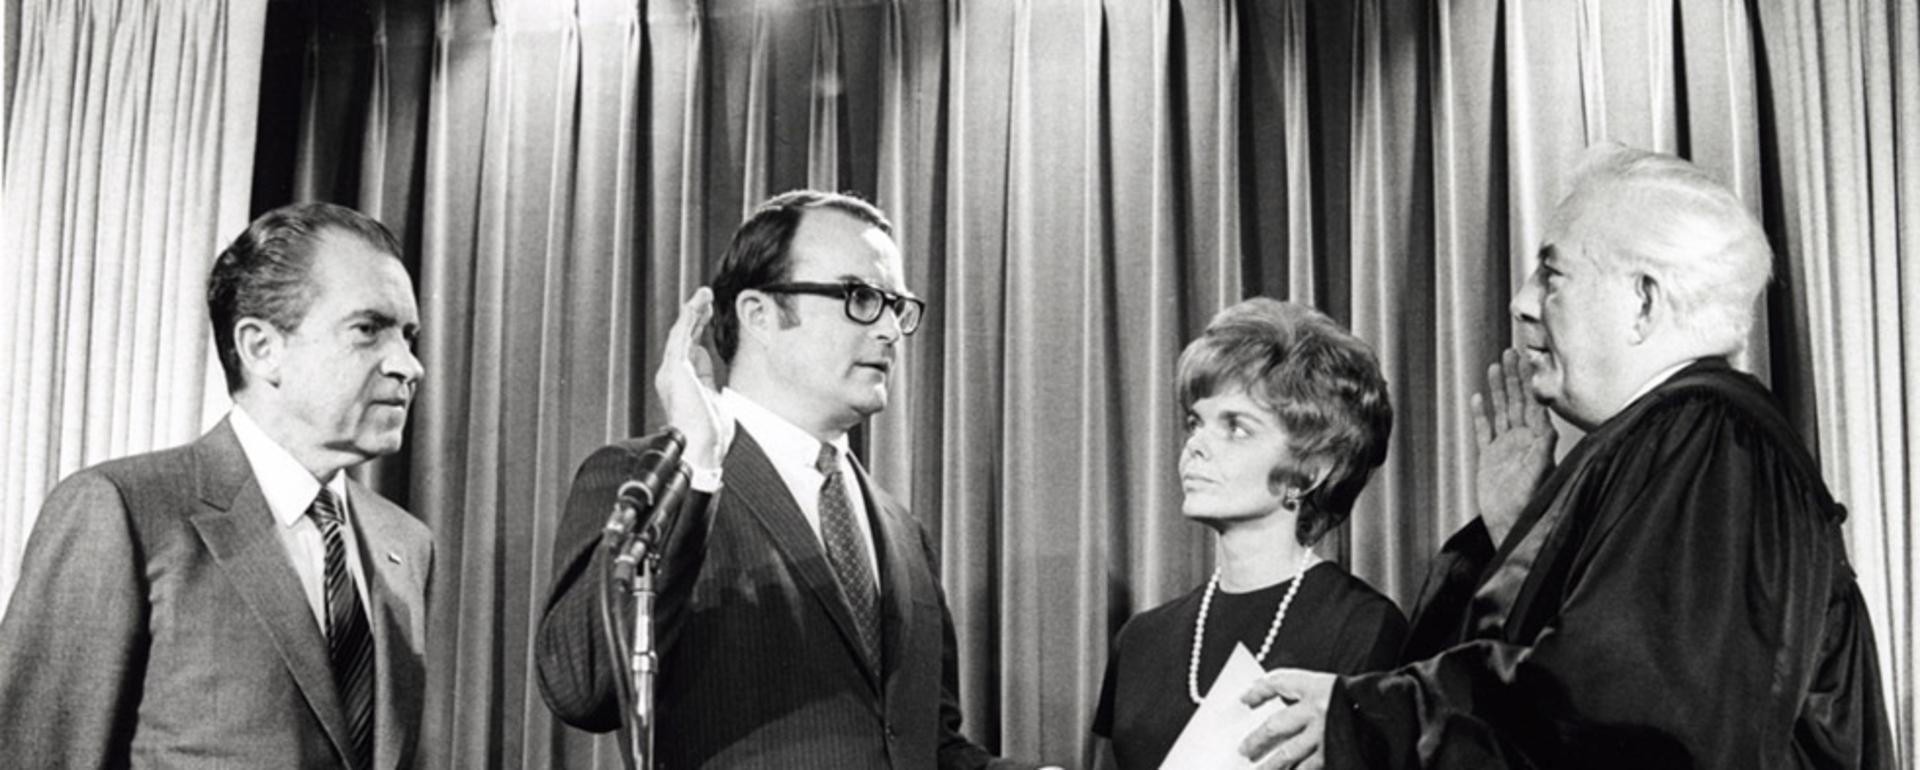 William Ruckelshaus being sworn in as the first chief administrator of the U.S. Environmental Protection Agency.  A policy institute, which promotes collaboration to solves disputes, bears his name at